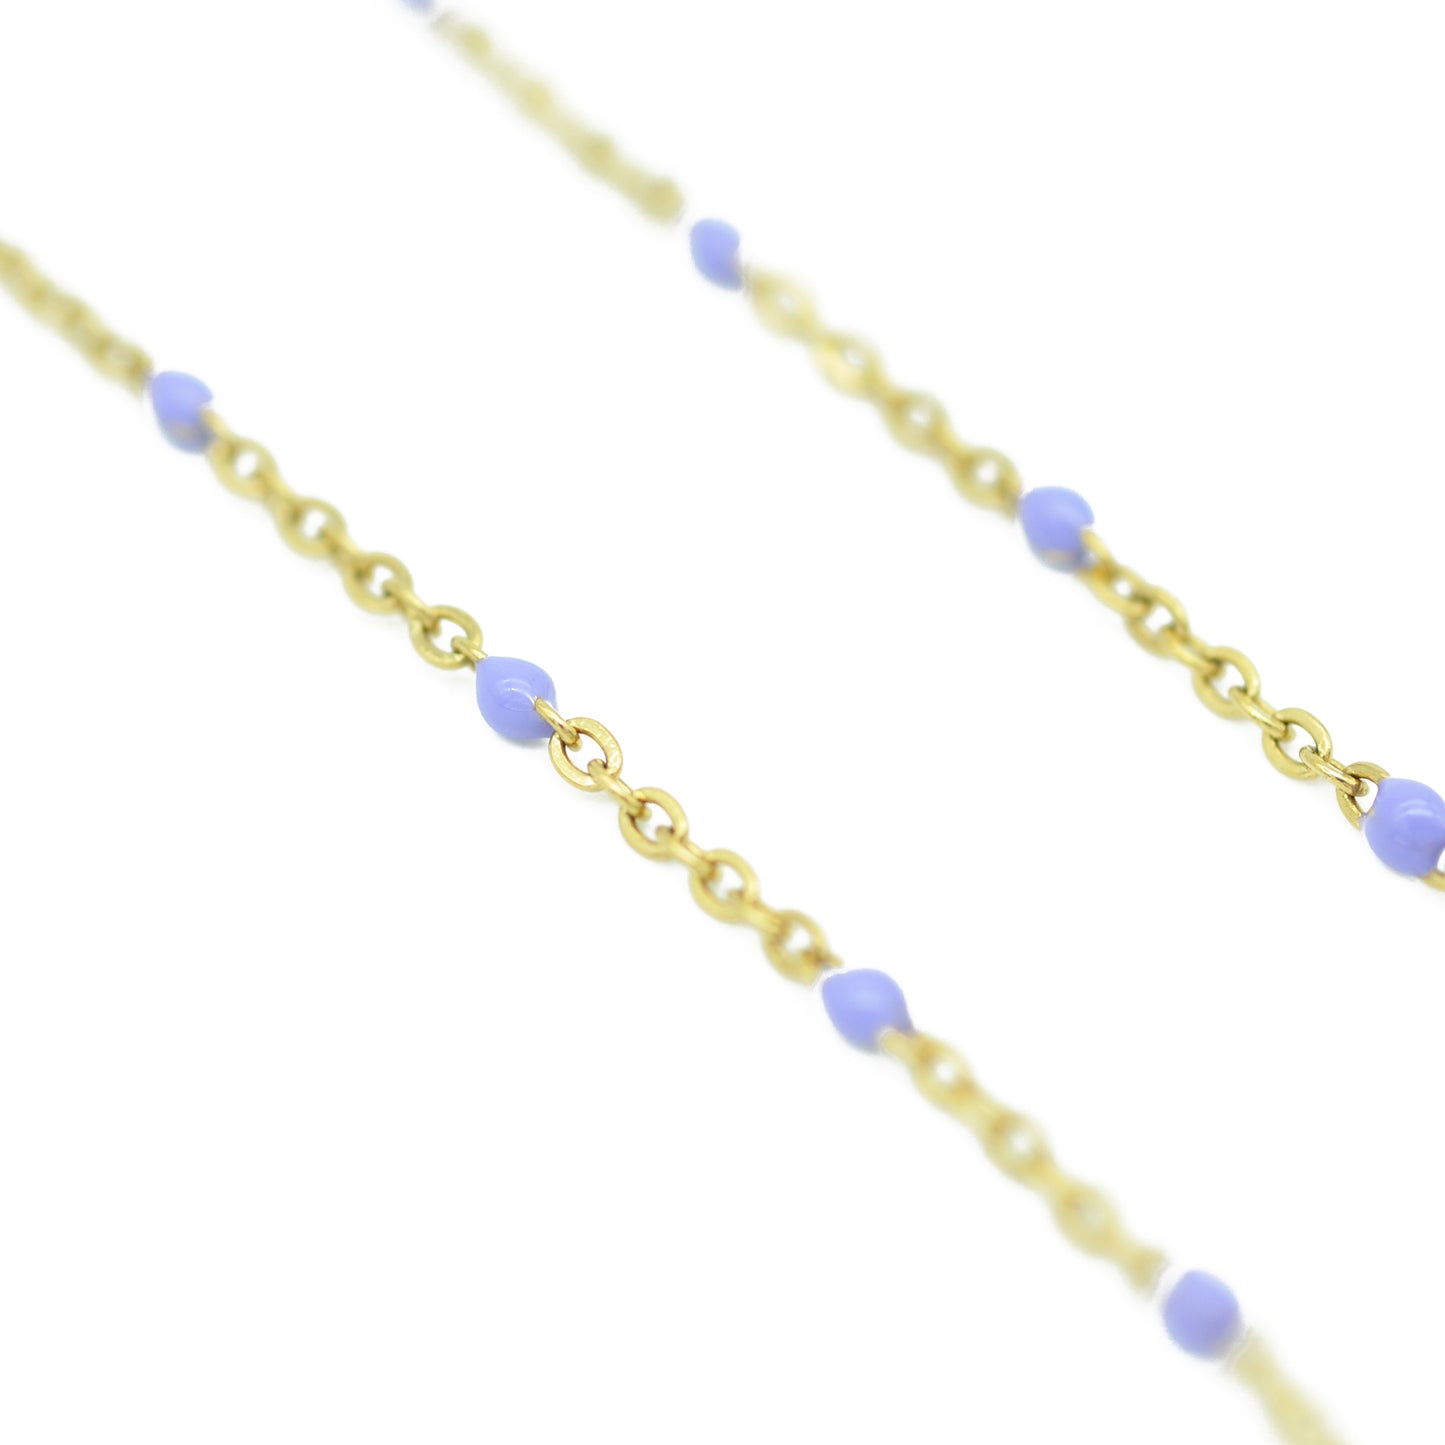 Stainless steel chain with beads / violet enamelled / gold plated / 45 cm